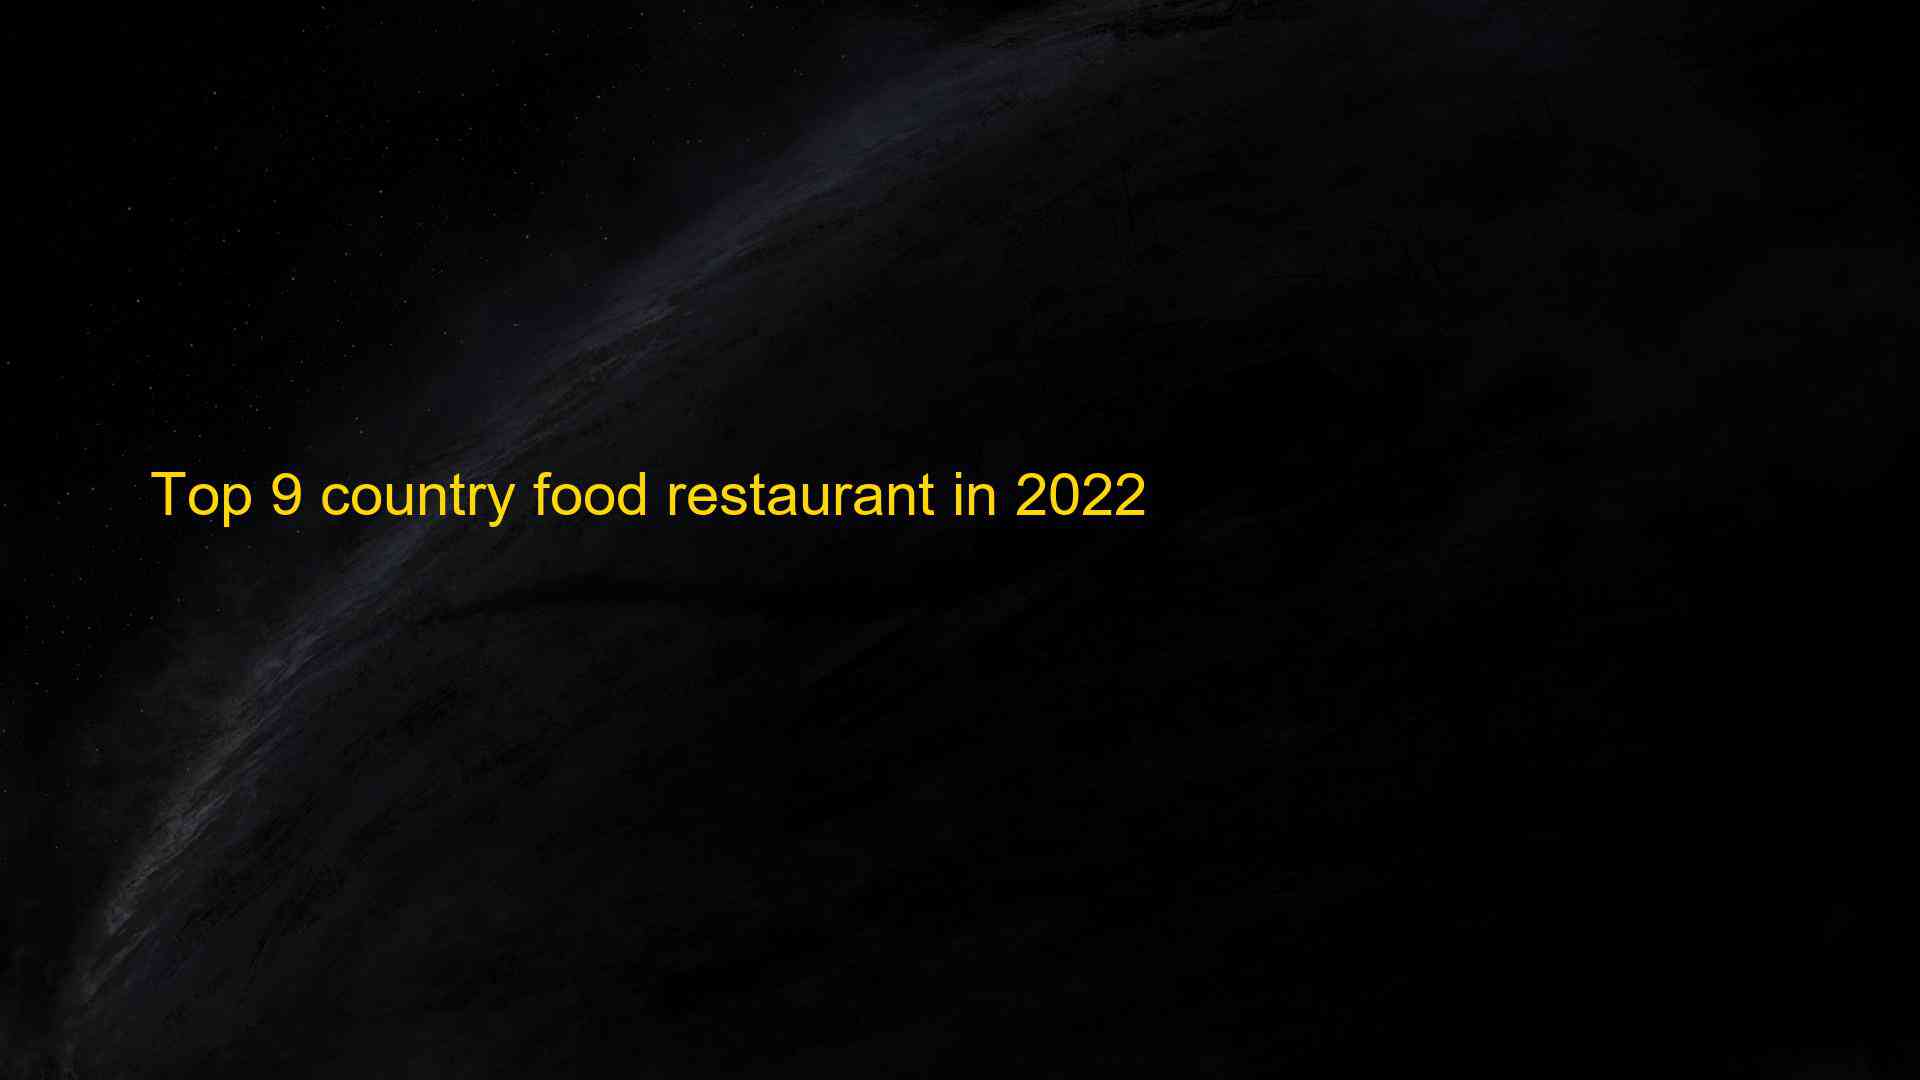 Top 9 country food restaurant in 2022 1663176468